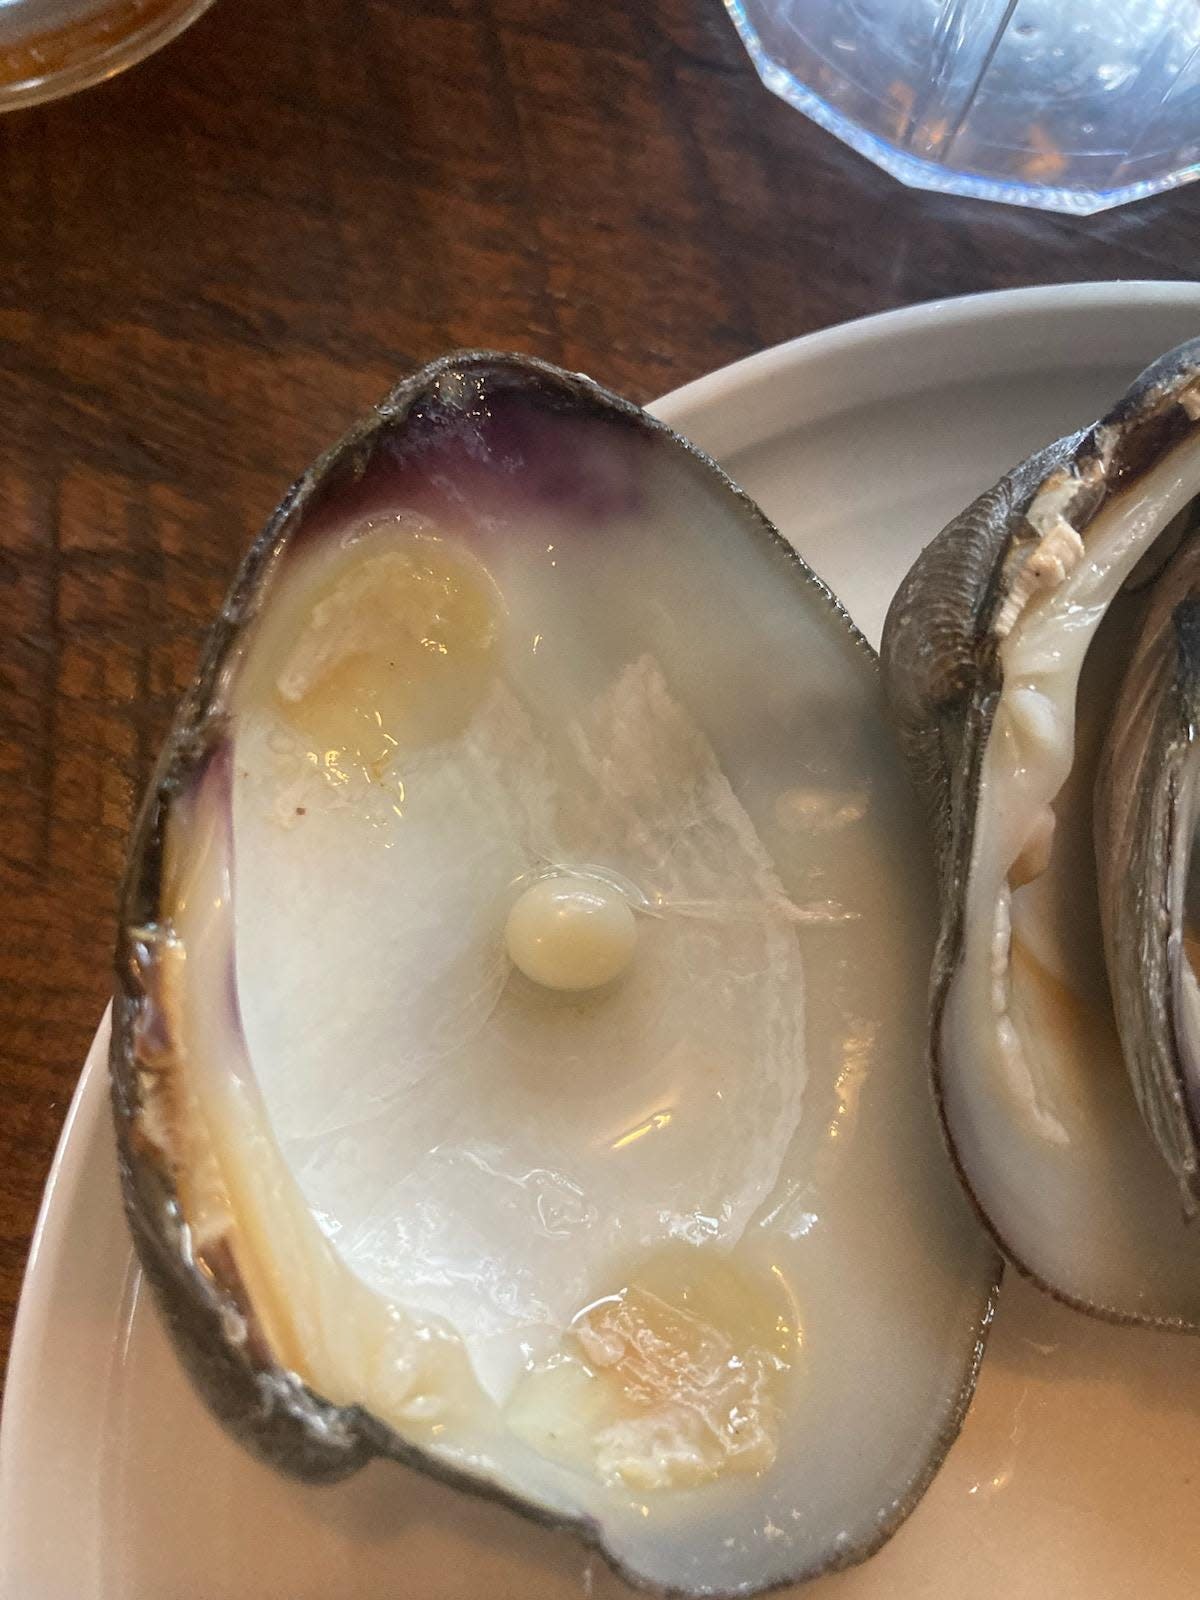 A mercenaria pearl. Couple Sandy Sikorski and Ken Steinkamp found the pearl while dining at a restaurant in December of 2021. The couple later turned the pearl into a ring and got engaged on July 6, 2023.